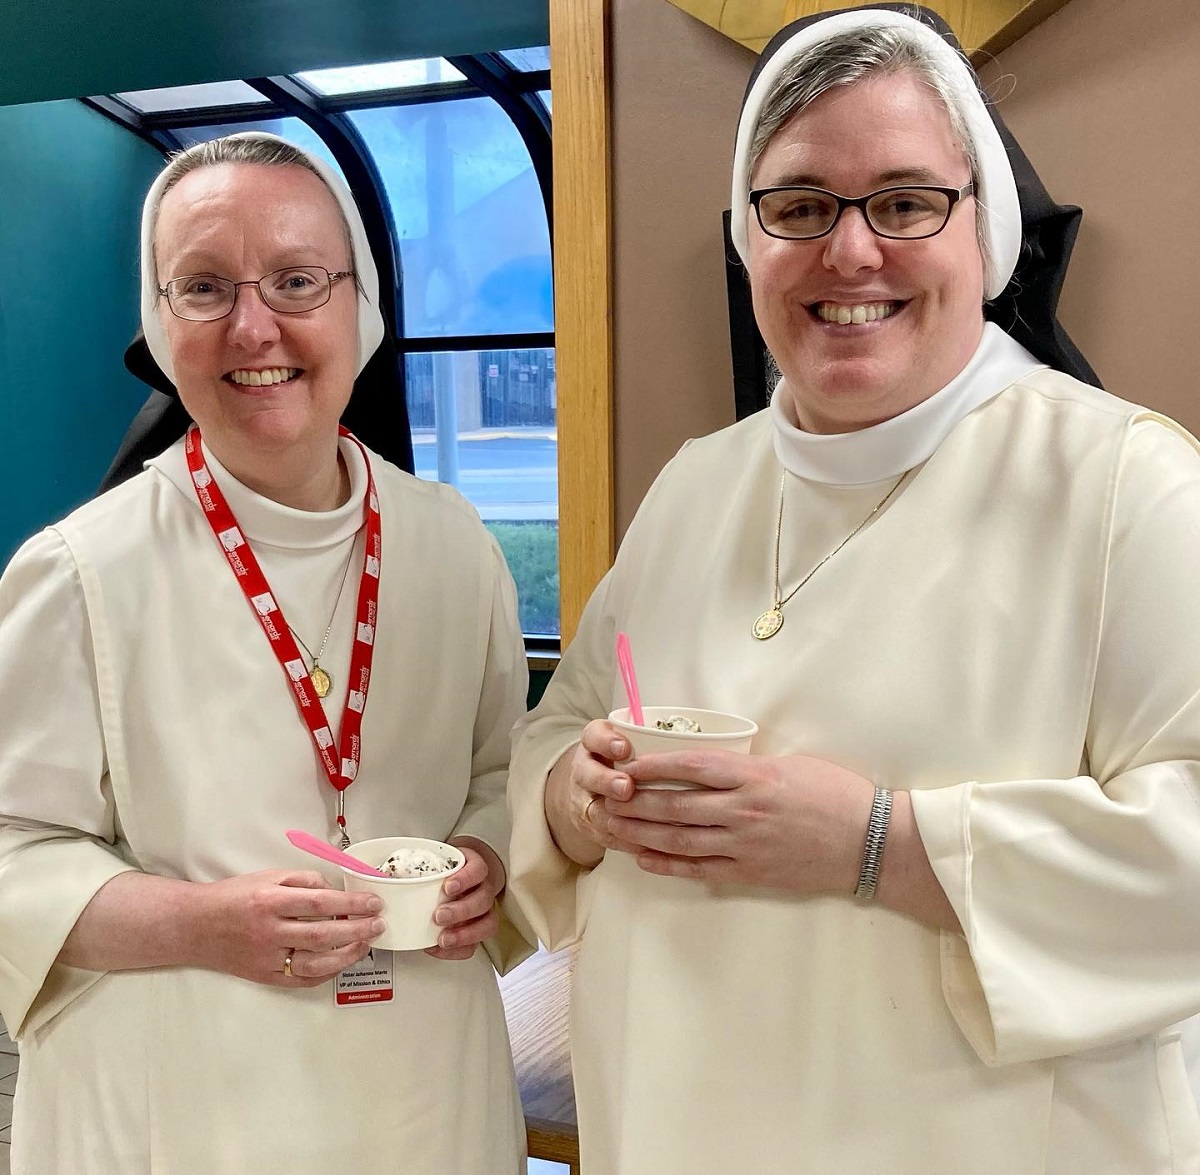 Sister Johanna Marie and Sister Glorea, Olivetan Benedictine Sisters from Holy Angels Convent in Jonesboro Arkansas, holding cups of @weloveloblolly ice cream. Photo from @StBernards and the Sisters' Facebook page at facebook.com/photo.php?fbid….